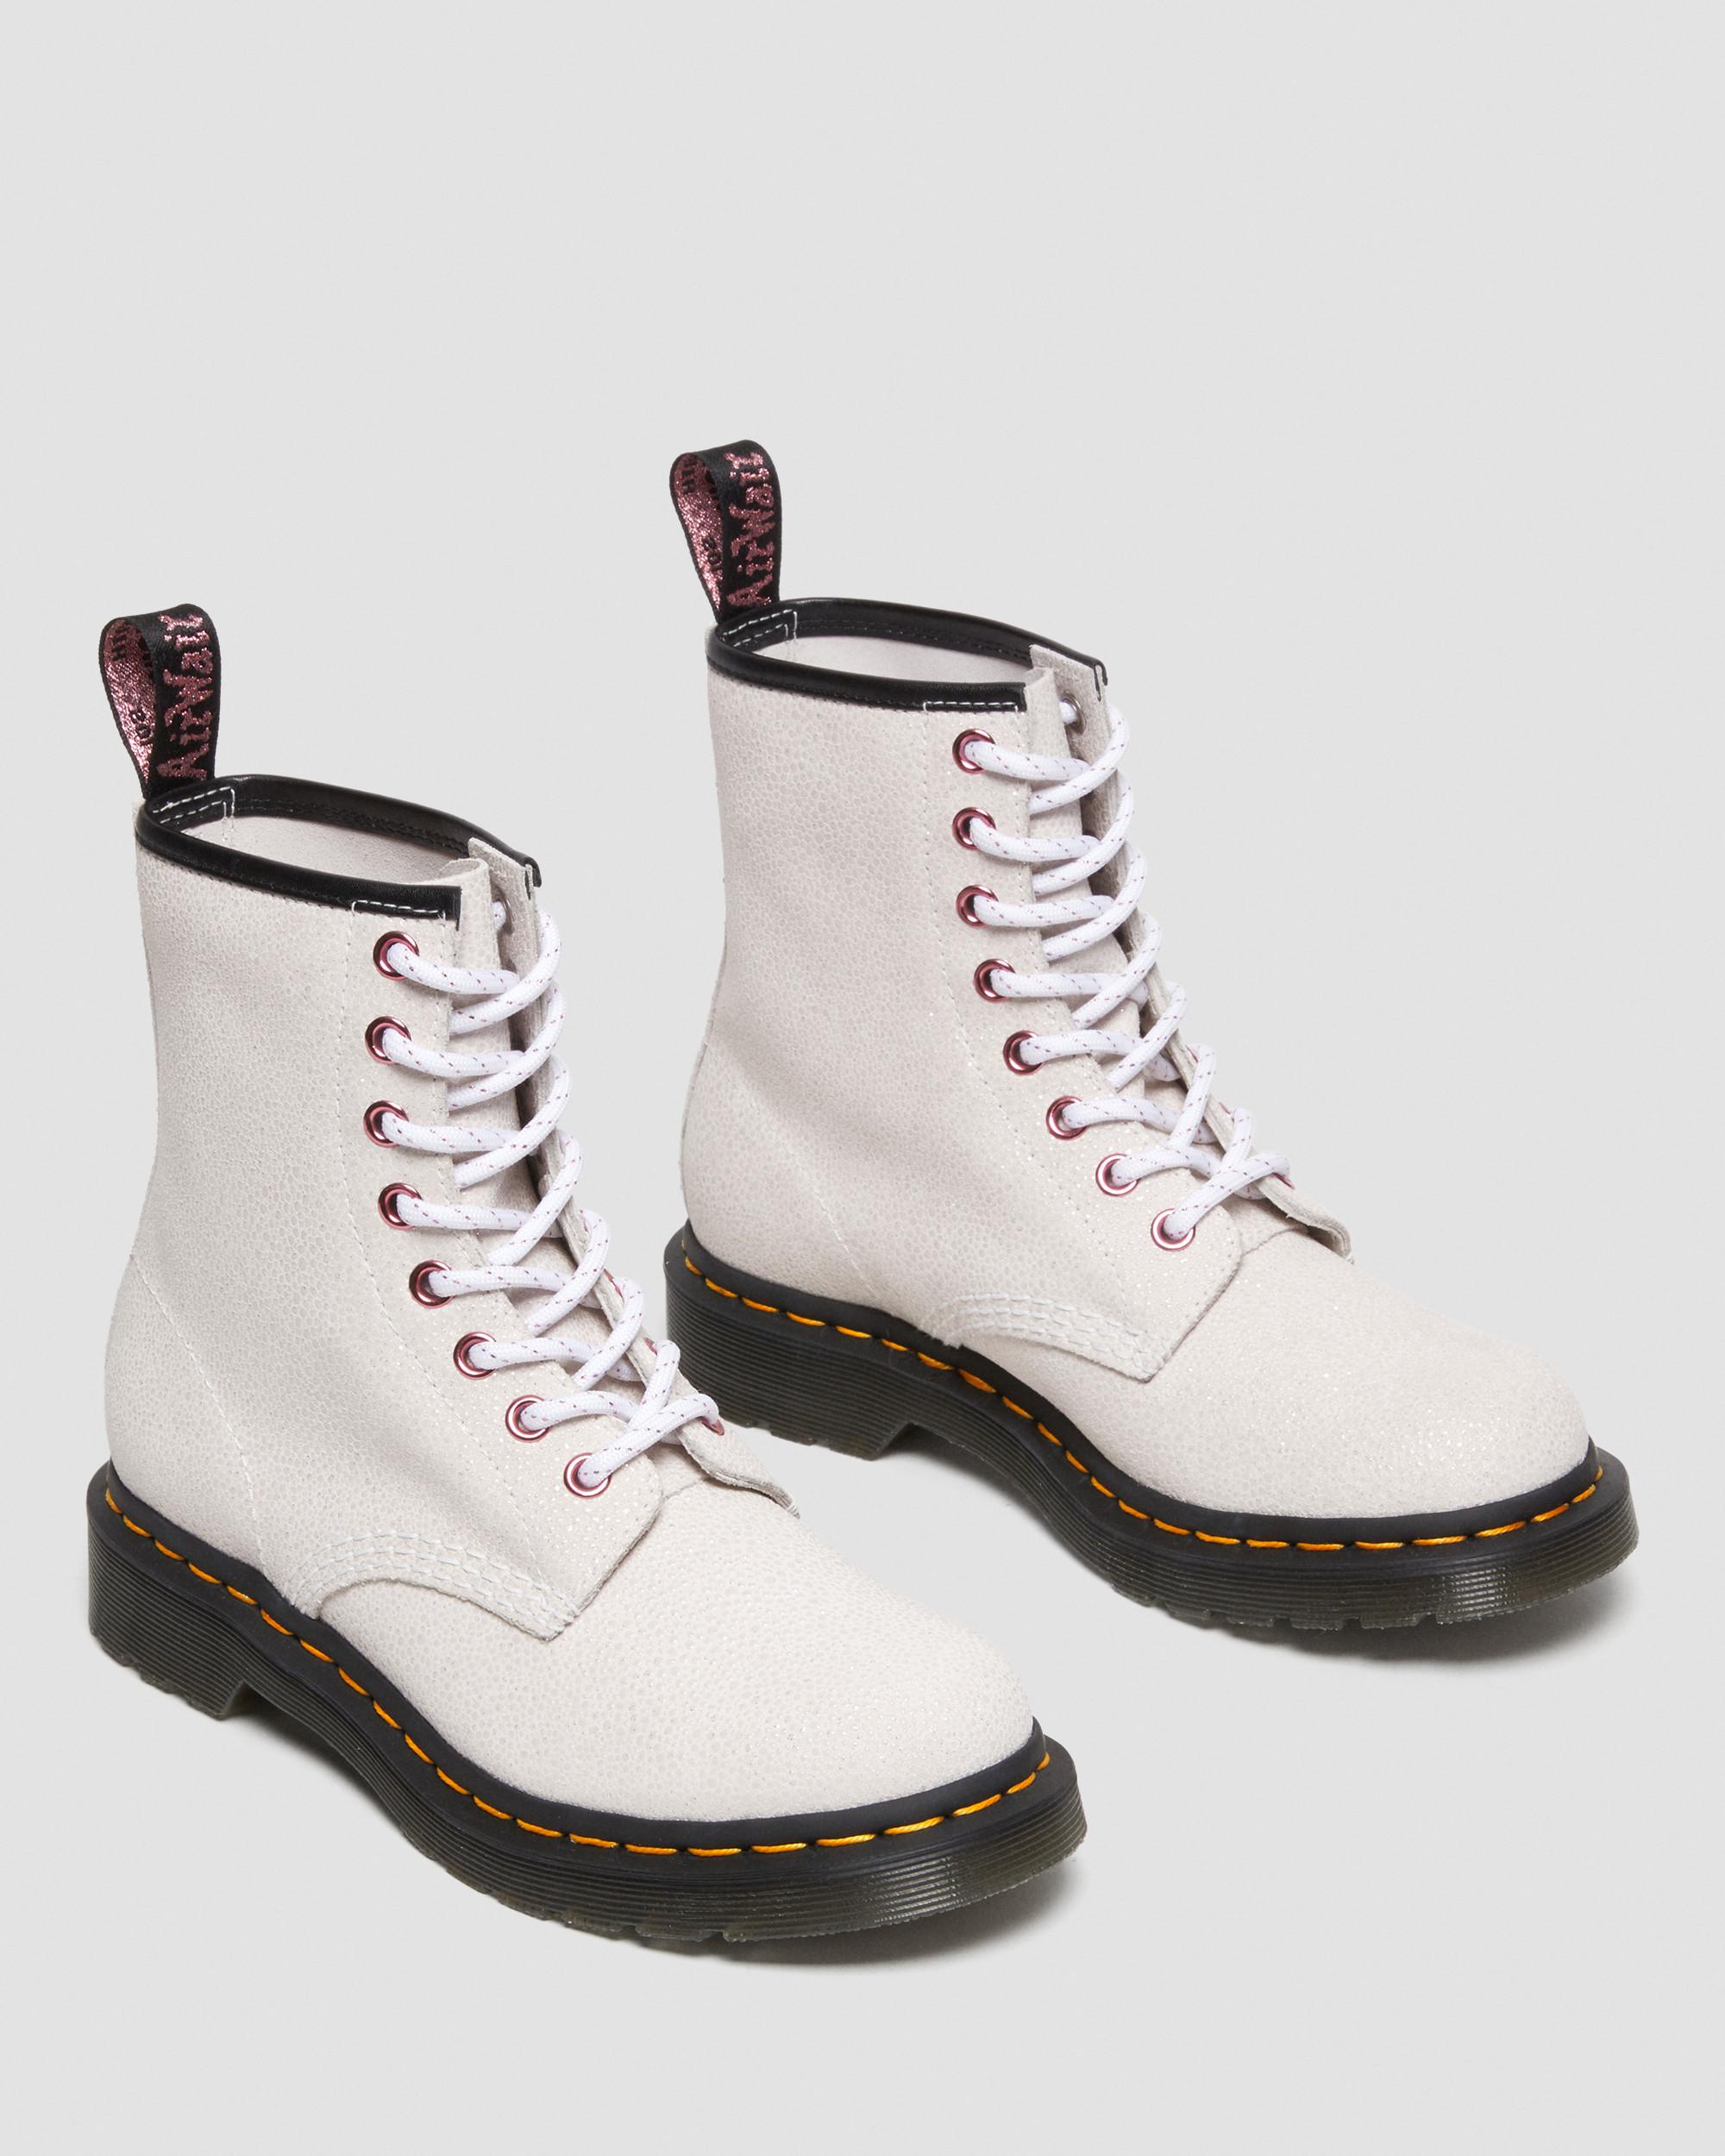 945 consumo picnic 1460 Women's Bejeweled Lace Up Boots | Dr. Martens